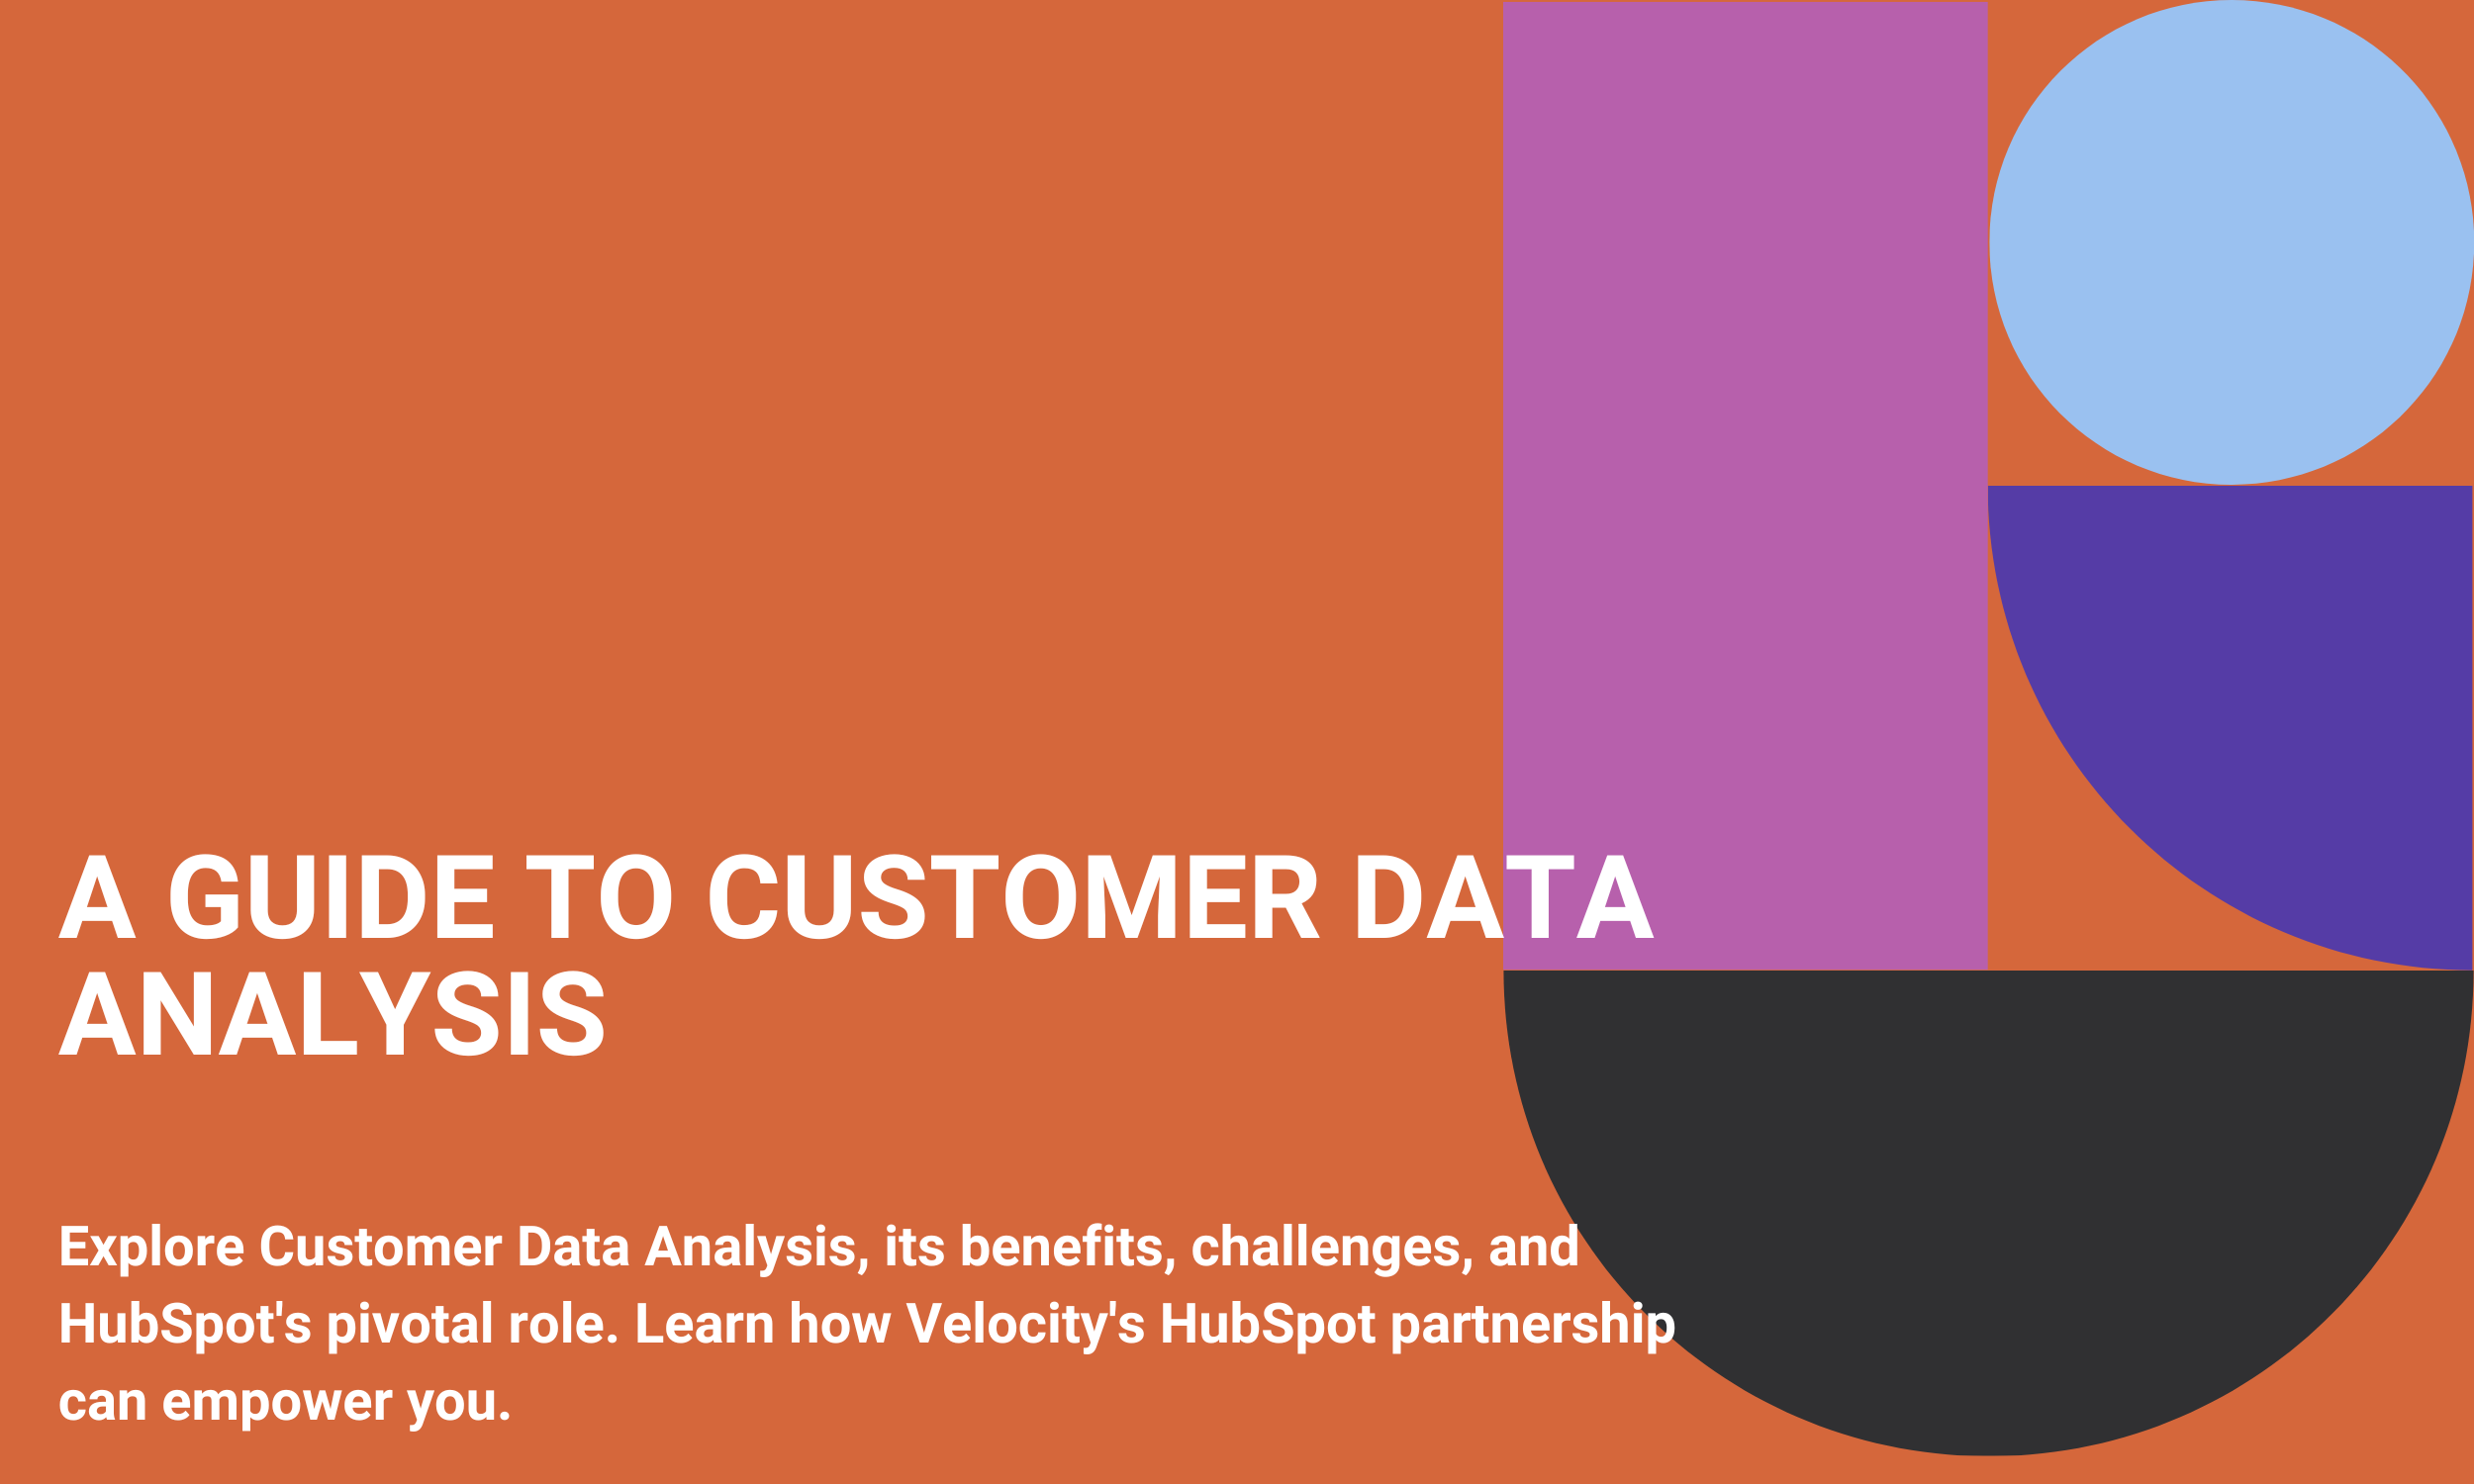 A Guide to Customer Data Analysis